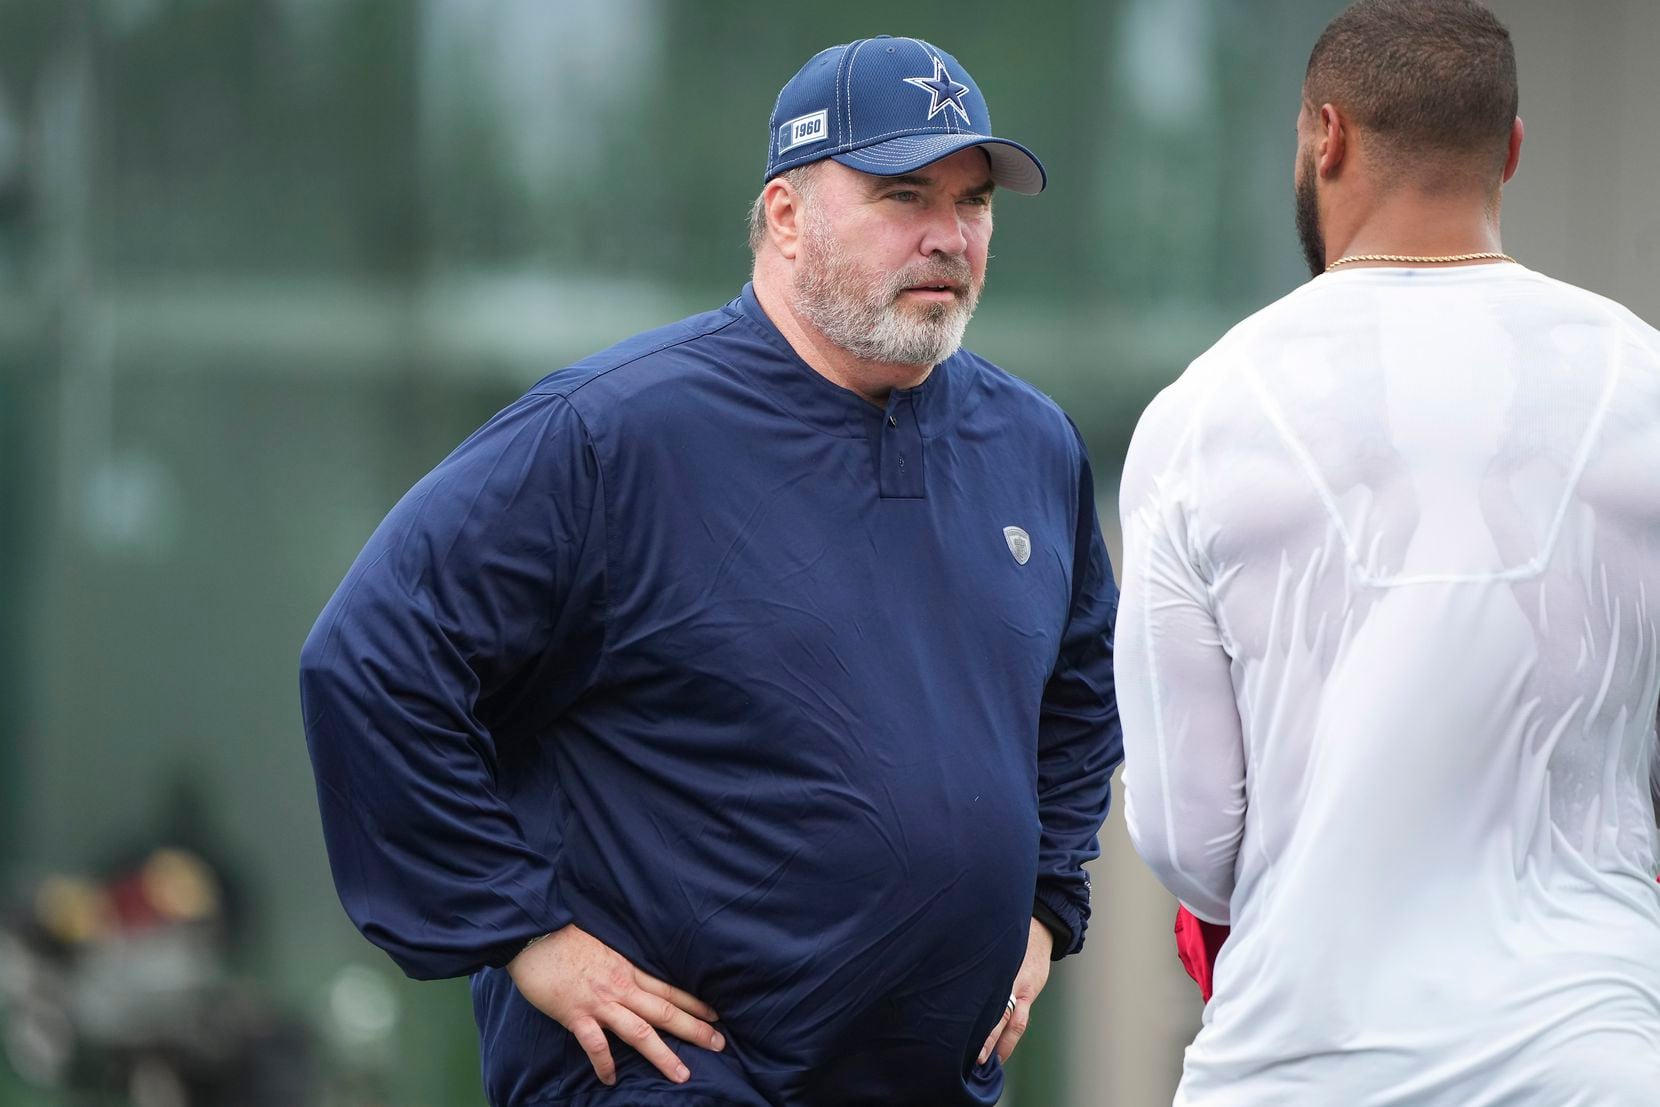 Dallas Cowboys head coach Mike McCarthy talks with quarterback Dak Prescott during a minicamp practice at The Star on Wednesday, June 9, 2021, in Frisco. (Smiley N. Pool/The Dallas Morning News)